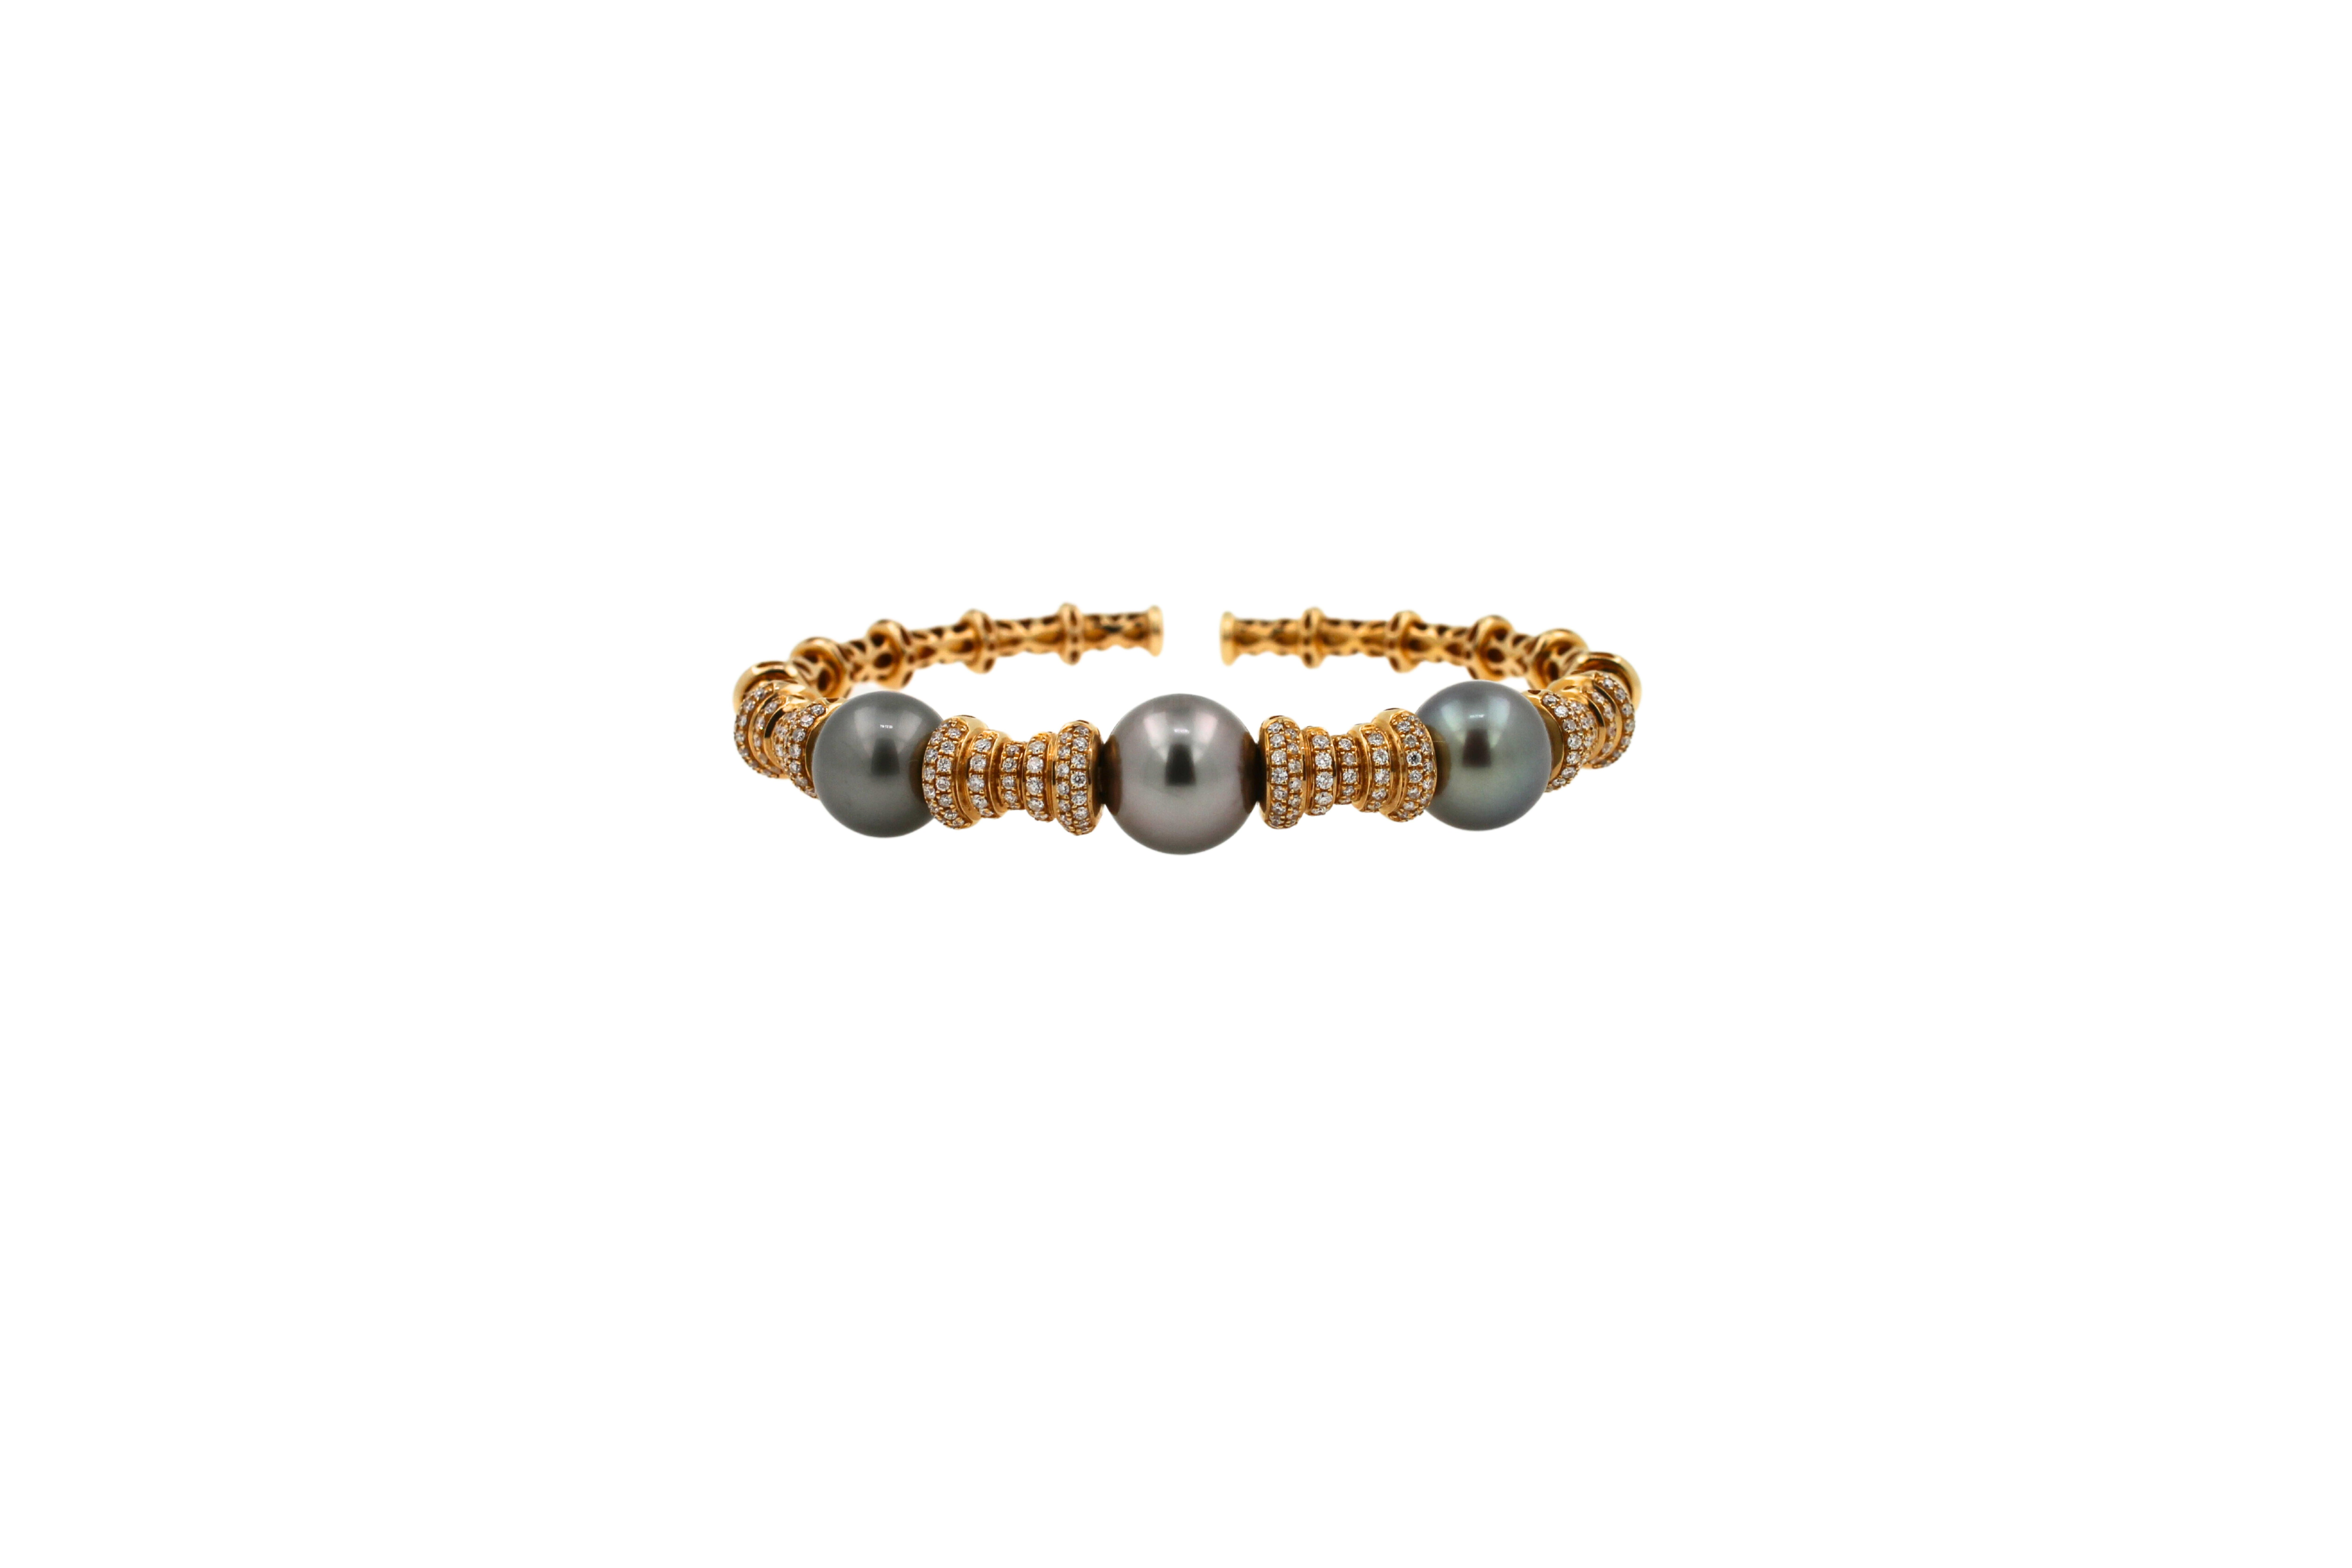 Tahitian Black Dark Grey Pearl Diamond Pave Set White Gold Bangle Cuff Bracelet
18K Yellow Gold
1.00 cts Diamonds 
Silvery Grey Black Tahitian Pearls with Amazing Luster, Color and Shine -Dark Tones with Brilliant Hue & Overtones
10-11mm Size